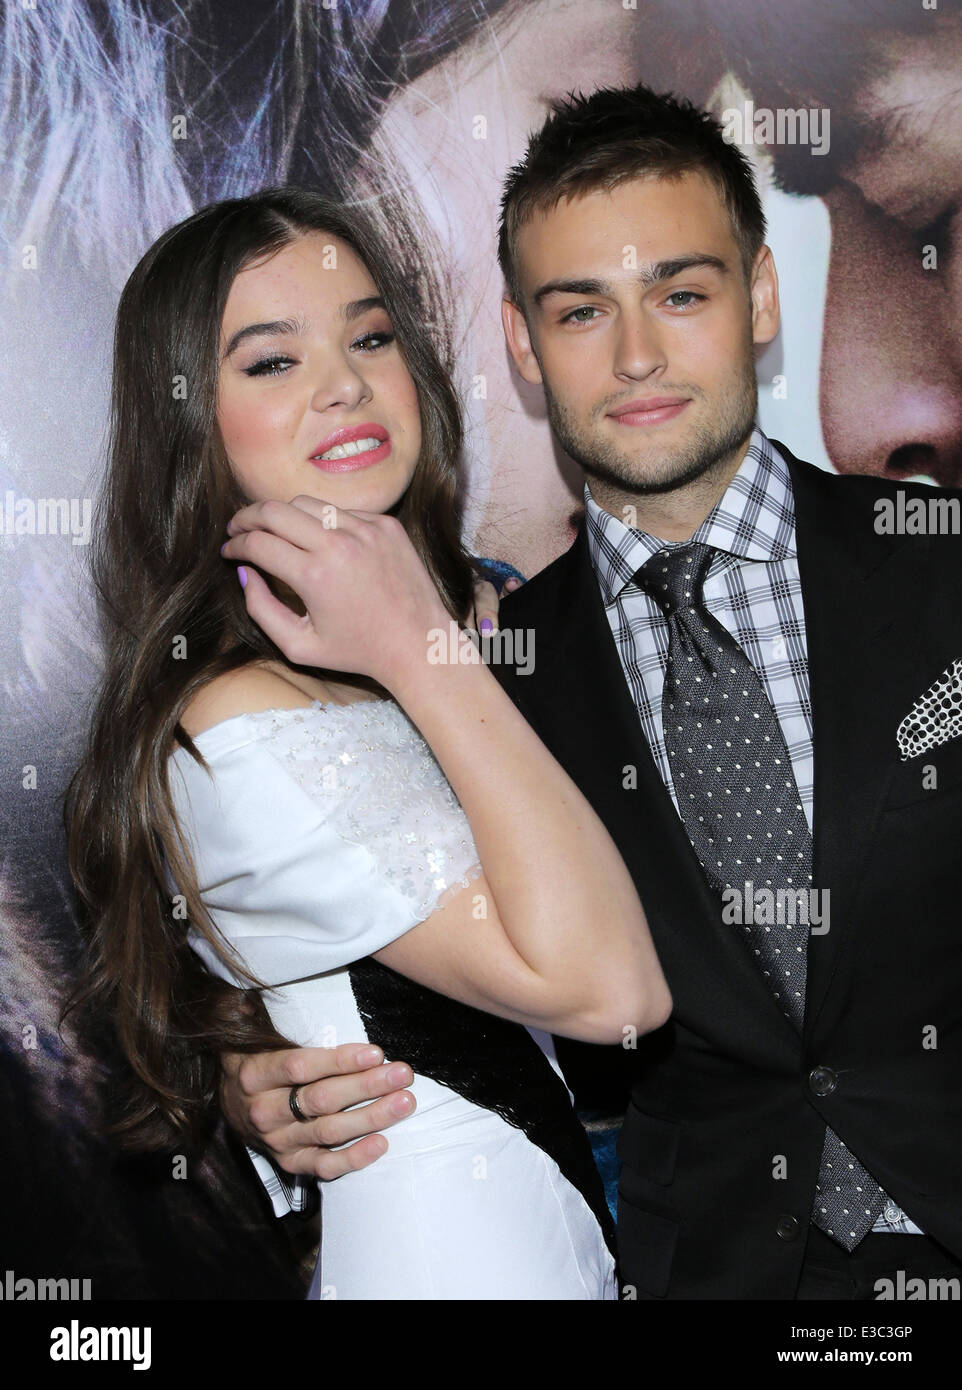 Premiere Of Relativity Media's 'Romeo and Juliet' Held at ArcLight Cinemas  Featuring: Hailee Steinfeld,Douglas Booth Where: Hollywood, California, United States When: 25 Sep 2013 Stock Photo